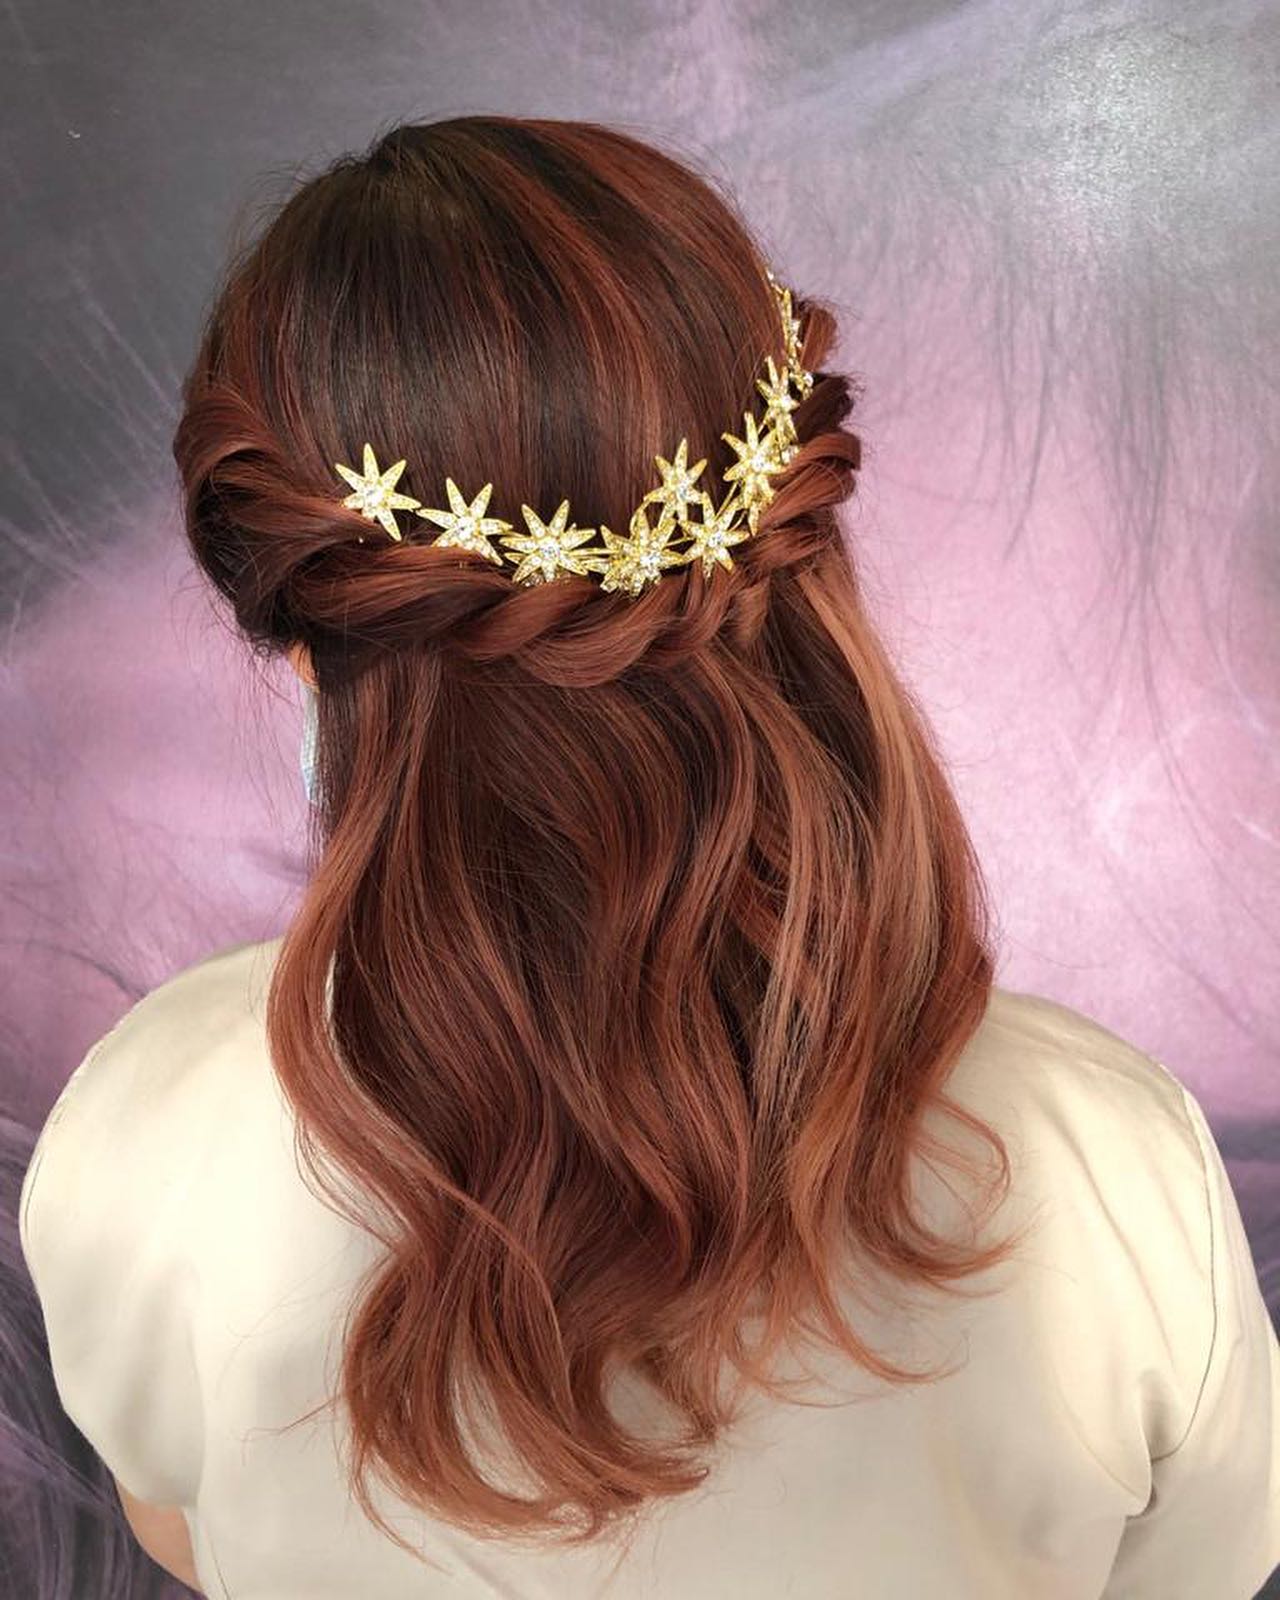 Half Up Half Down Hairstyle With Stars